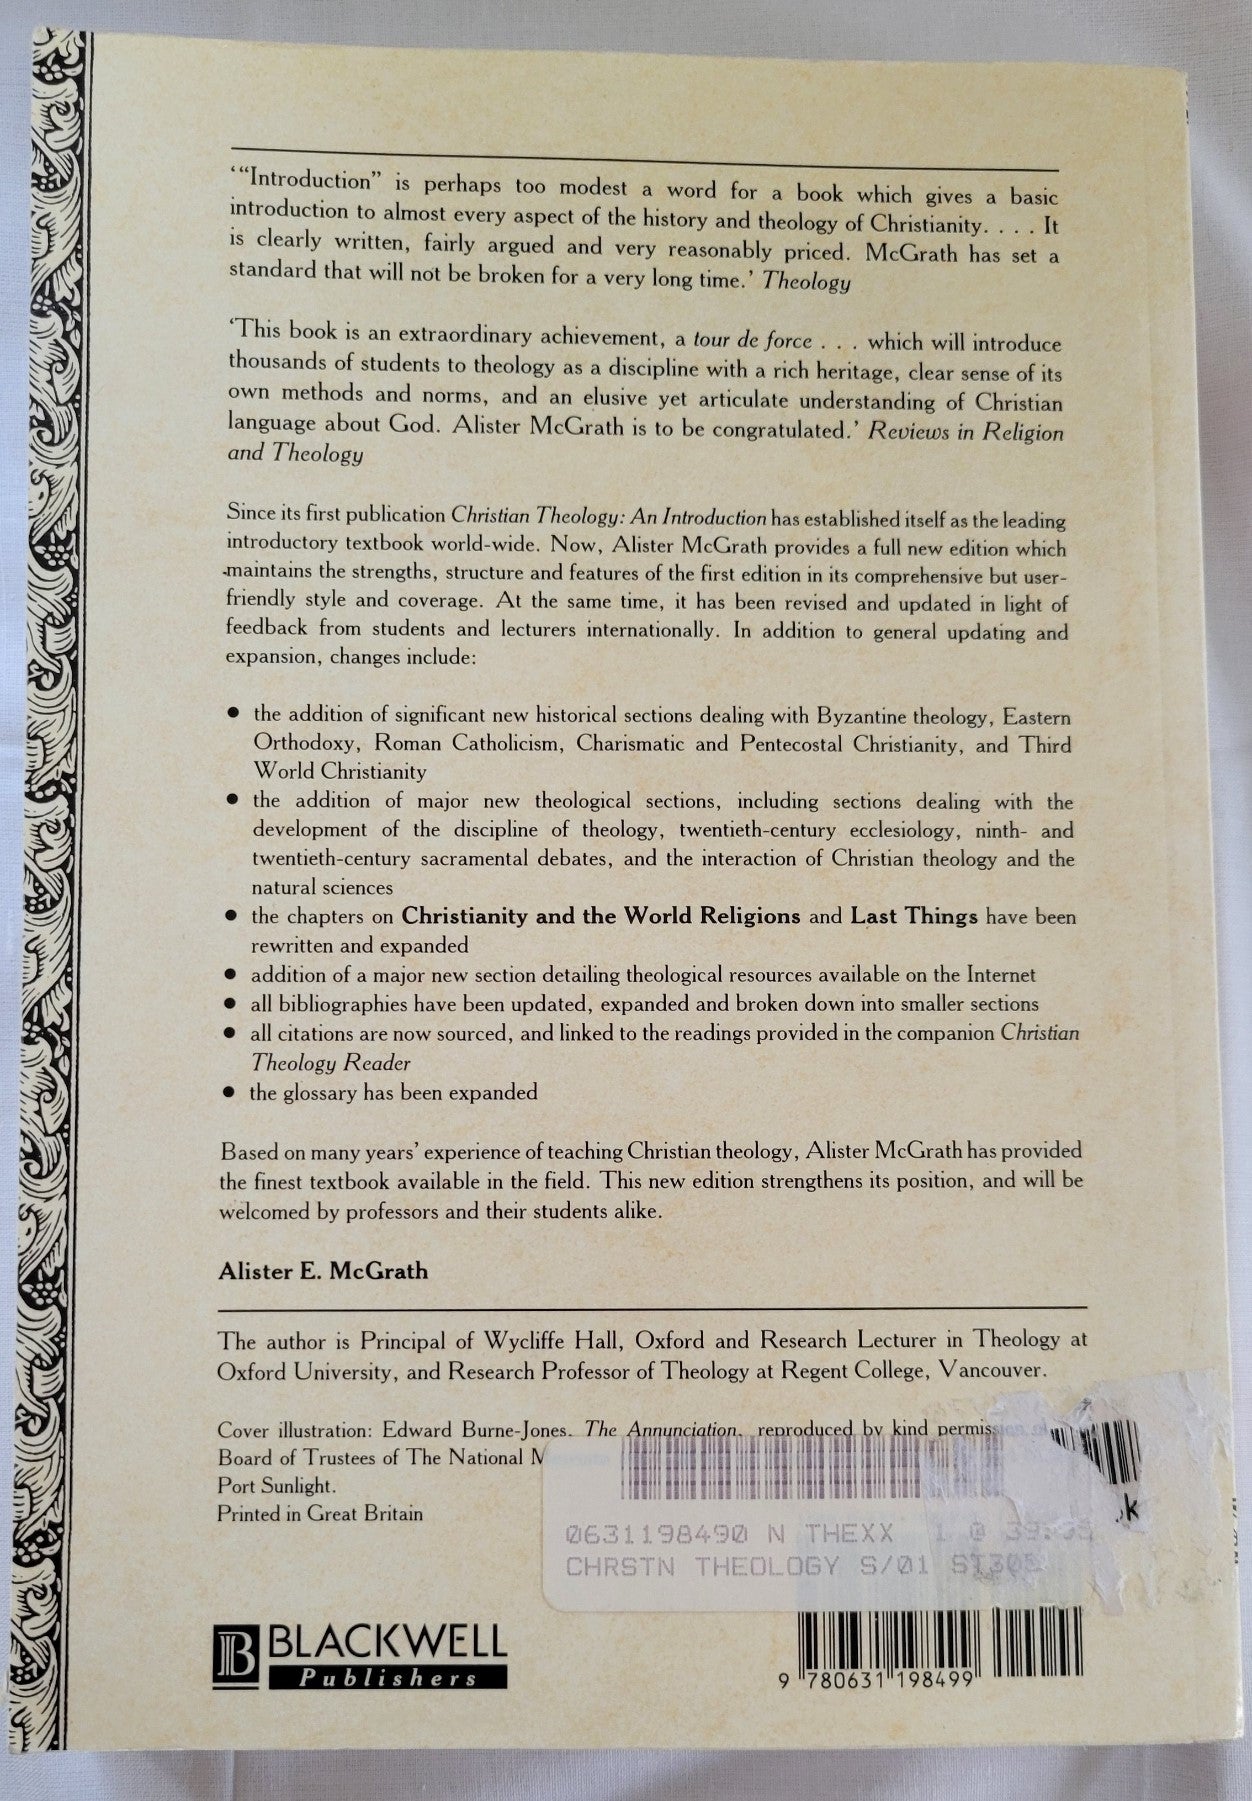 Used book. Christian Theology: An Introduction, Second Edition written by Alister McGrath, published by Blackwell Publishers. View of back cover.